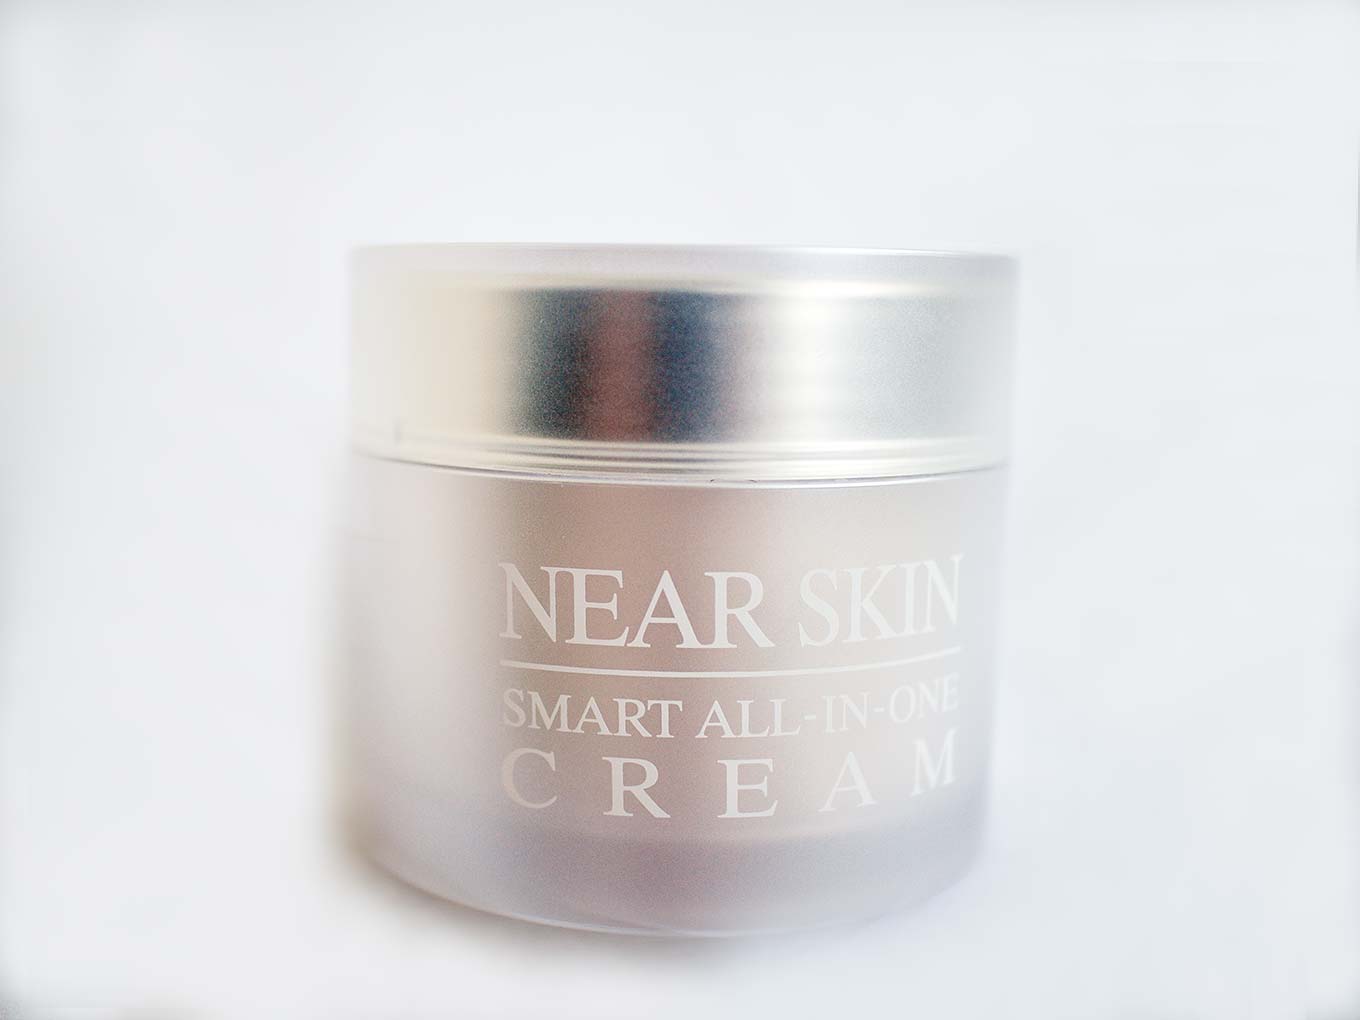 Missha near skin smart all in one cream review for oily face